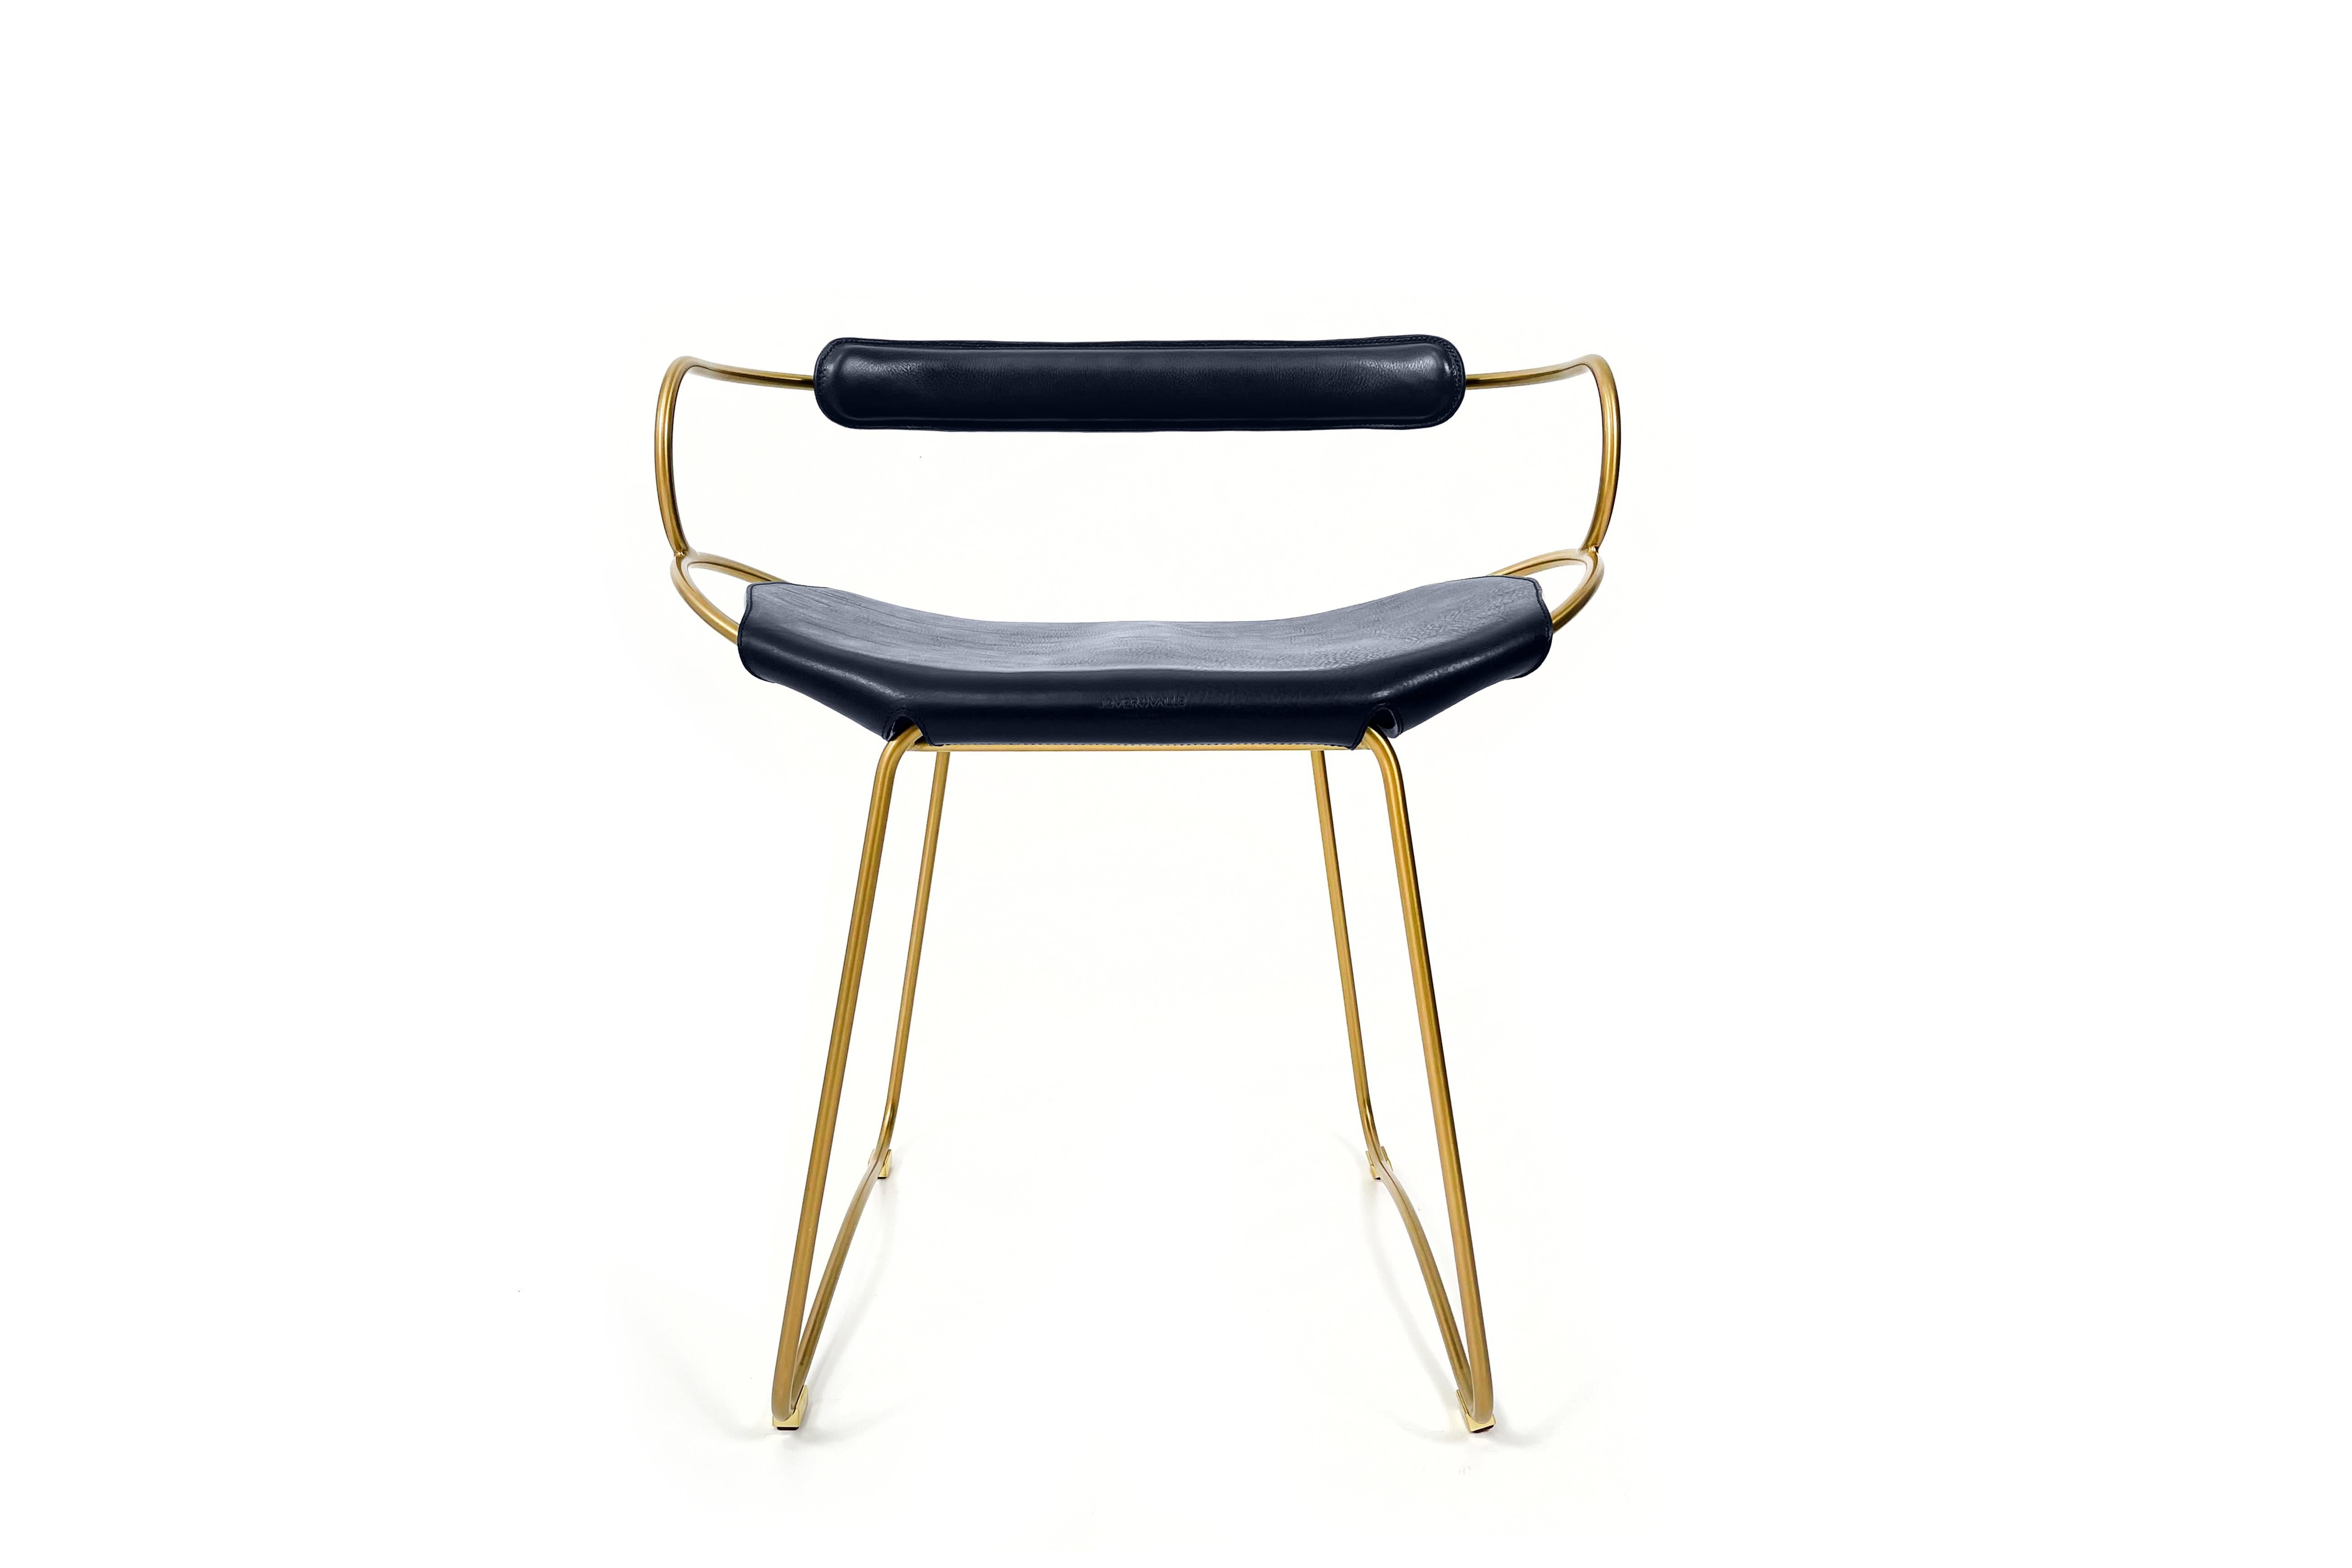 Modern Contemporary Chair / Table Stool W Backrest Aged Brass Metal & Navy Blue Leather For Sale